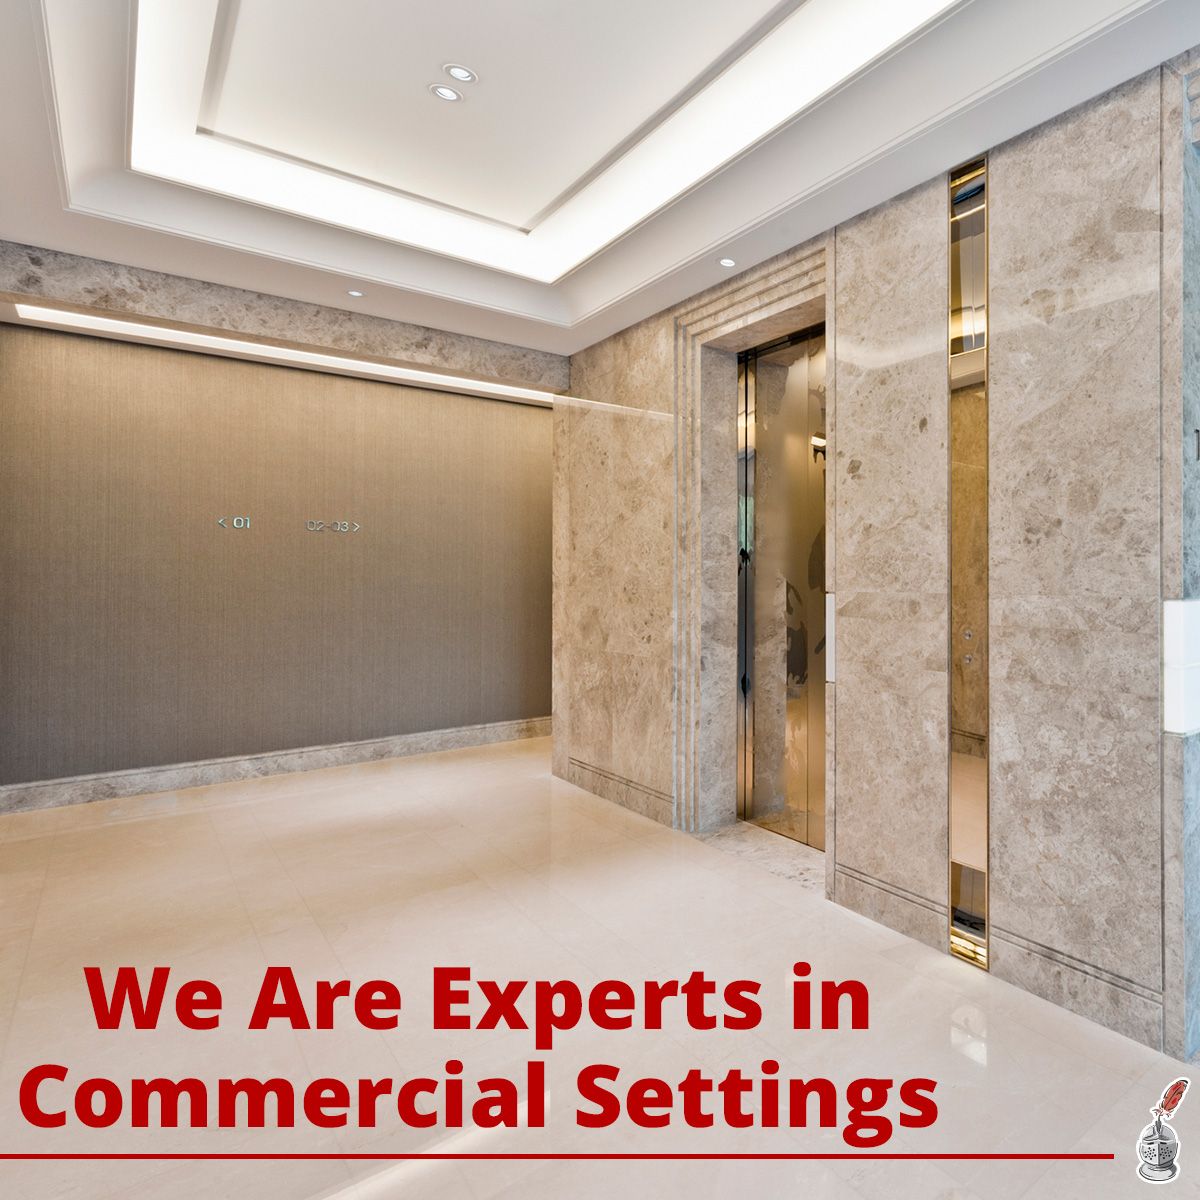 We Are Experts in Commercial Settings